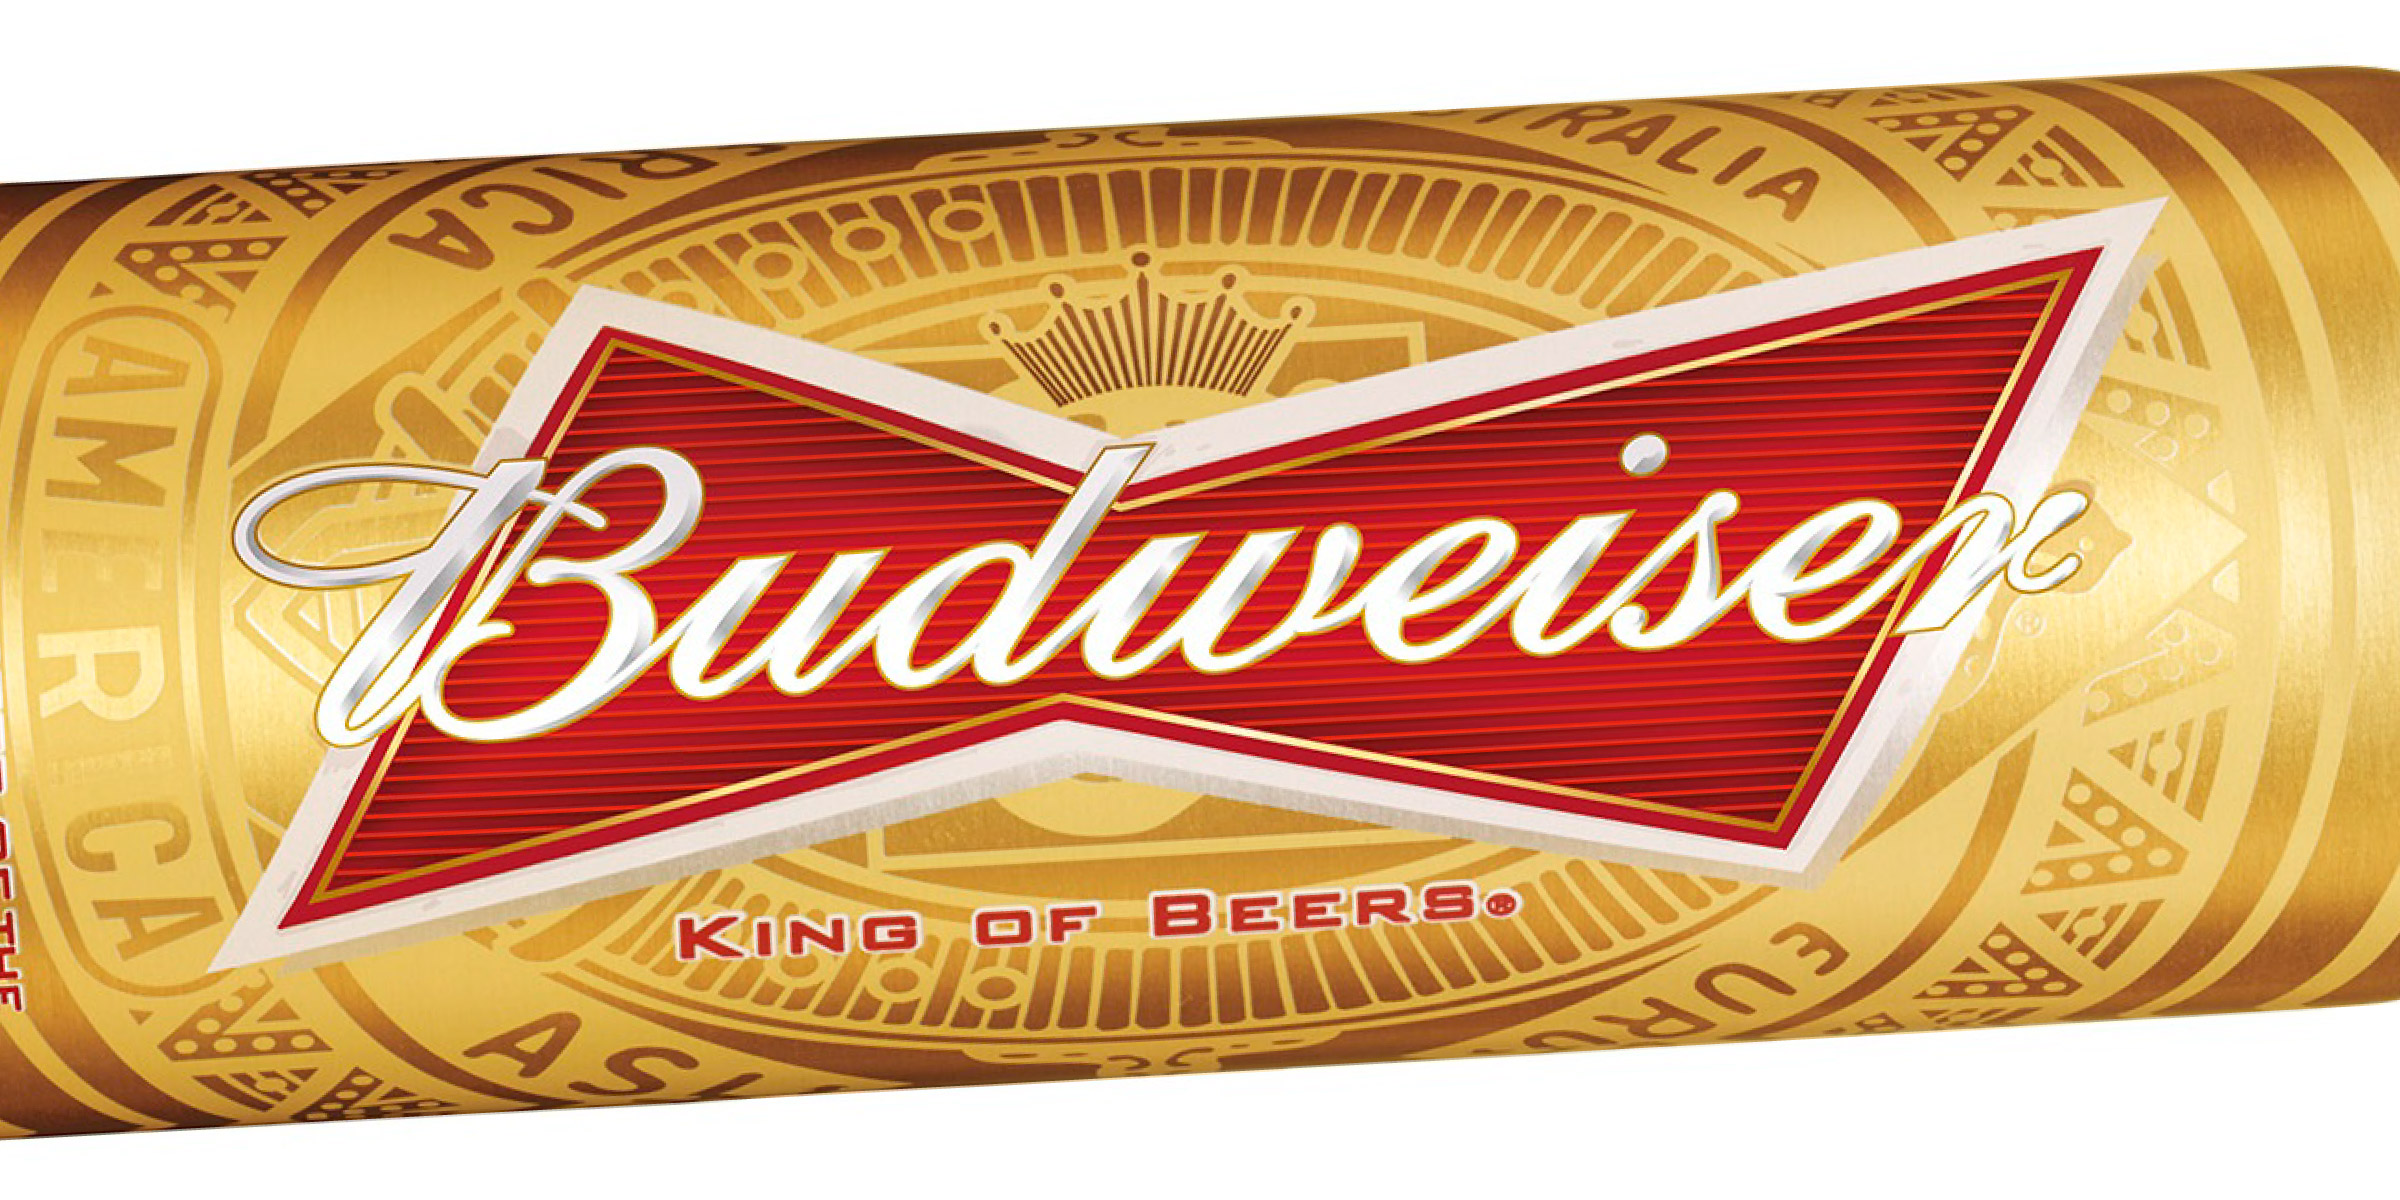 Budweiser Unveils Limited Edition 2014 FIFA World Cup Brazil Bottle